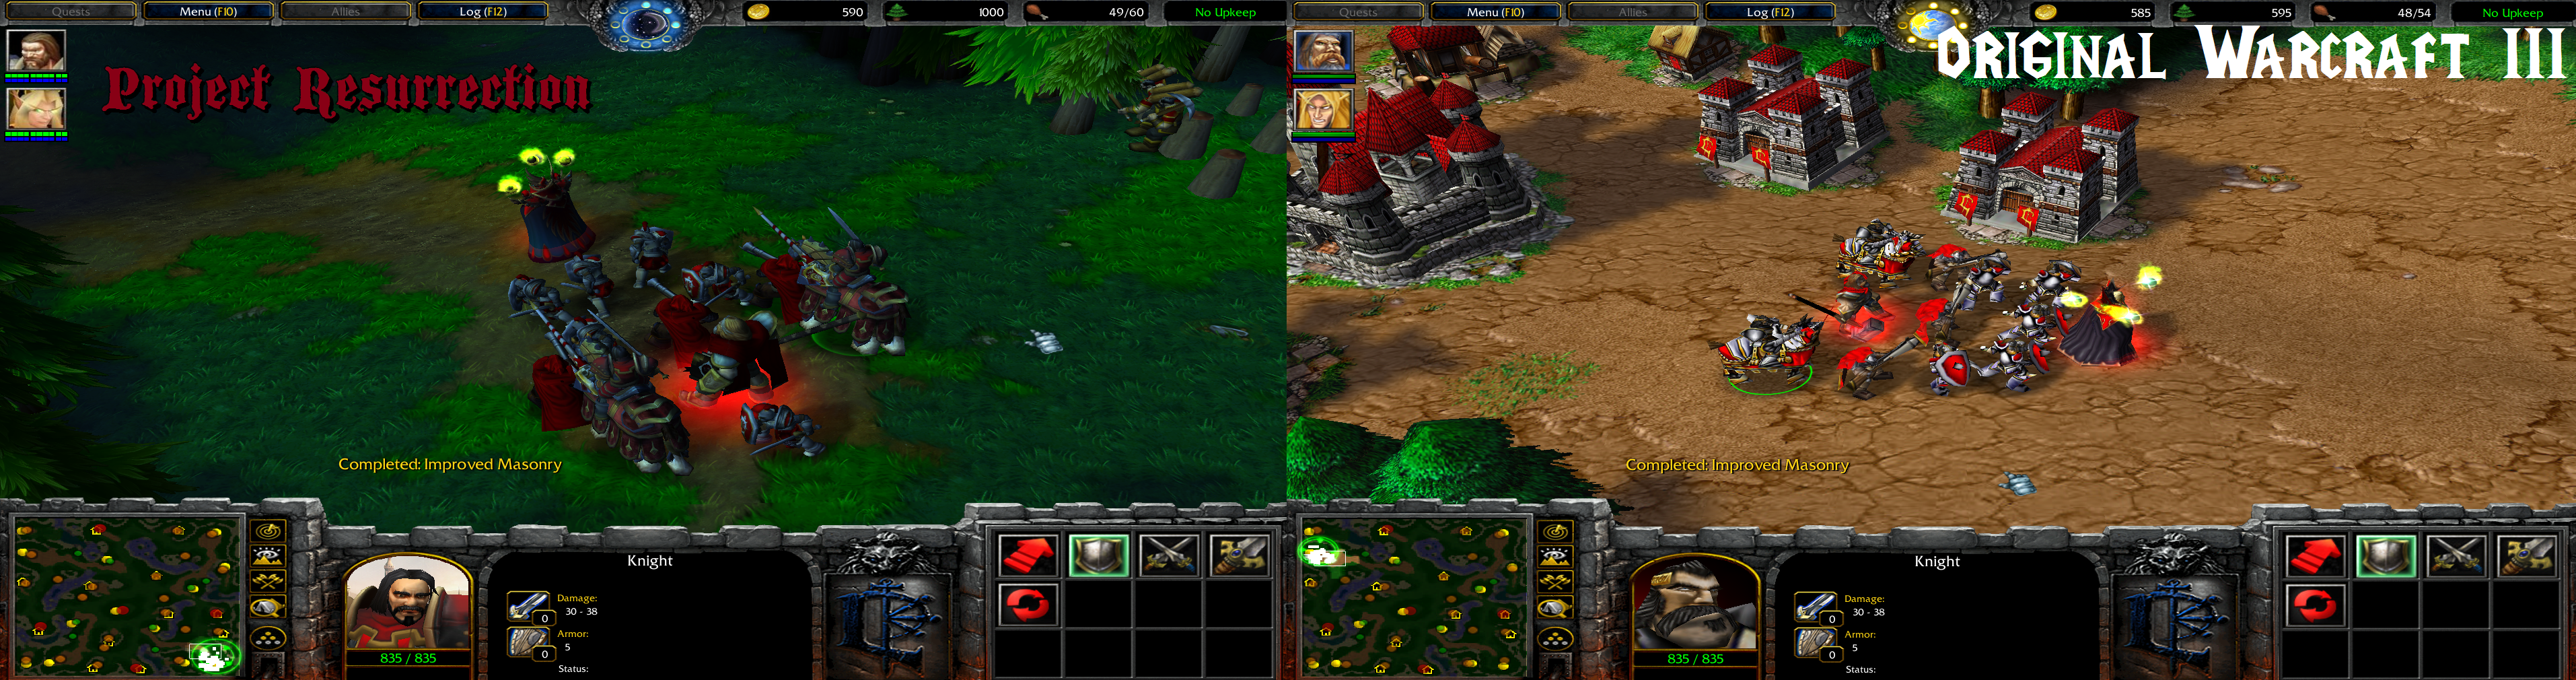 Is warcraft 3 on steam фото 29